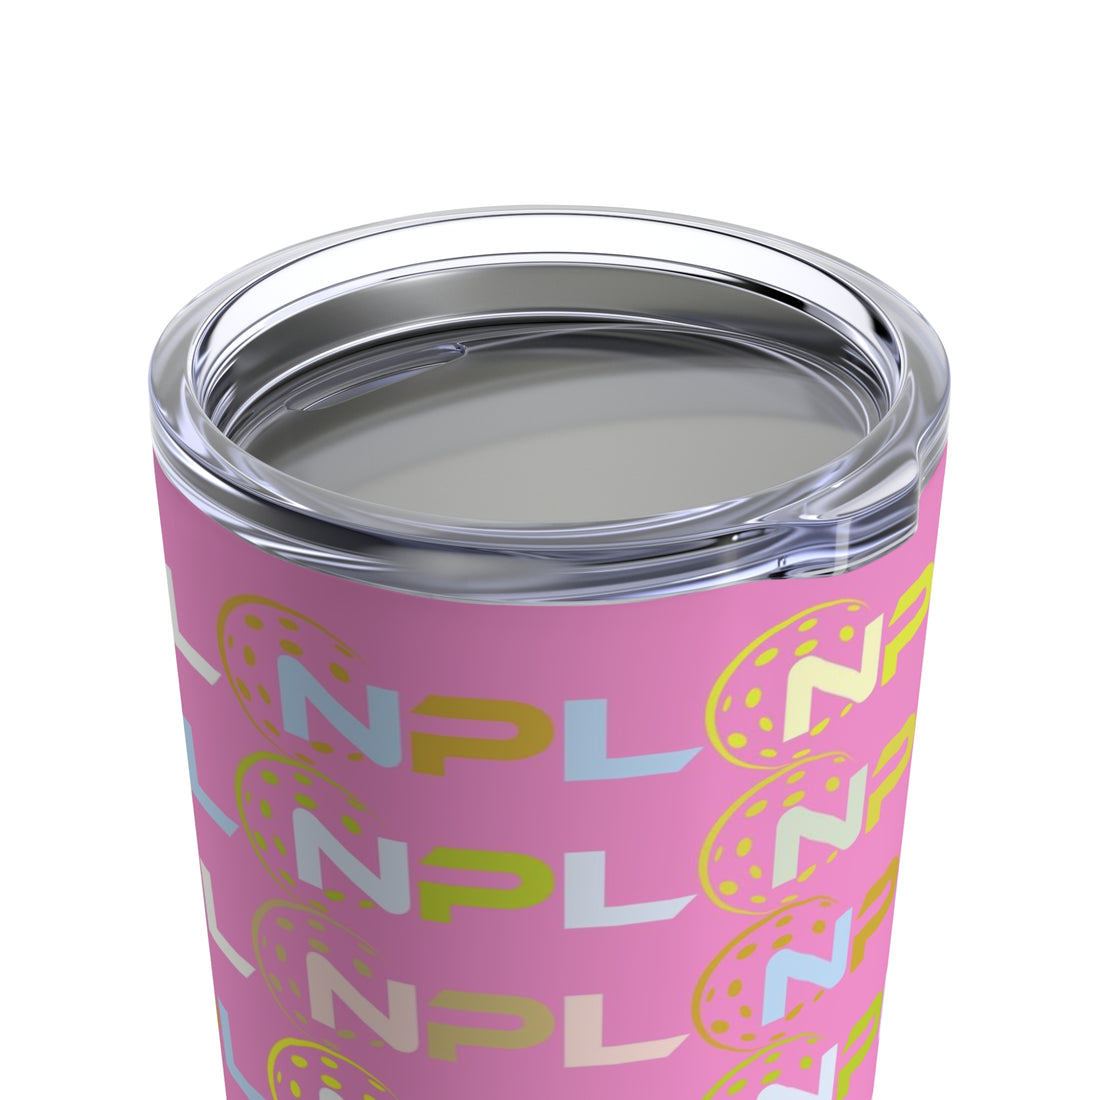 Sip in Style with the Pickle in Pink NPL™ Pop-Art 20 oz Tumbler!